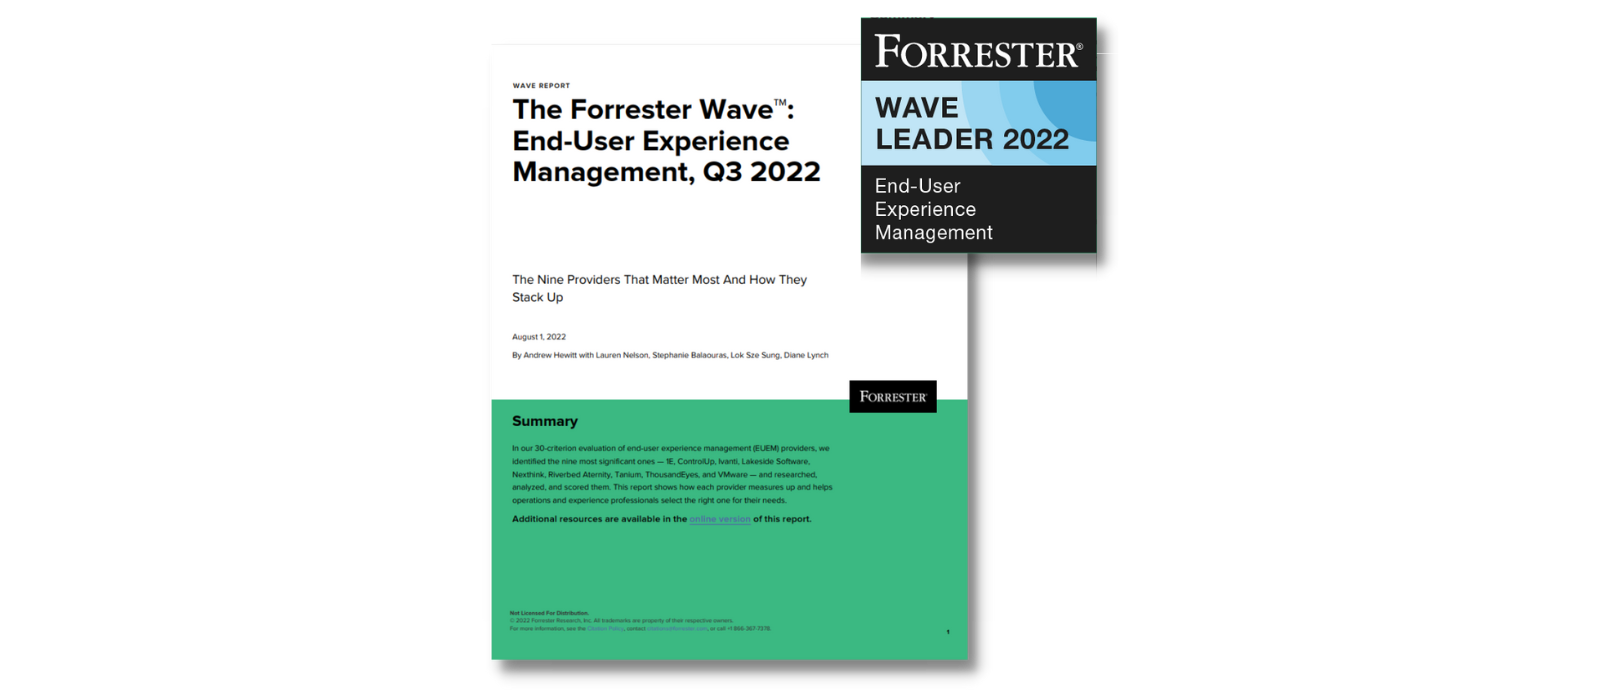 Cover image for The Forrester Wave: End-User Experience Management, Q3 2022 report.